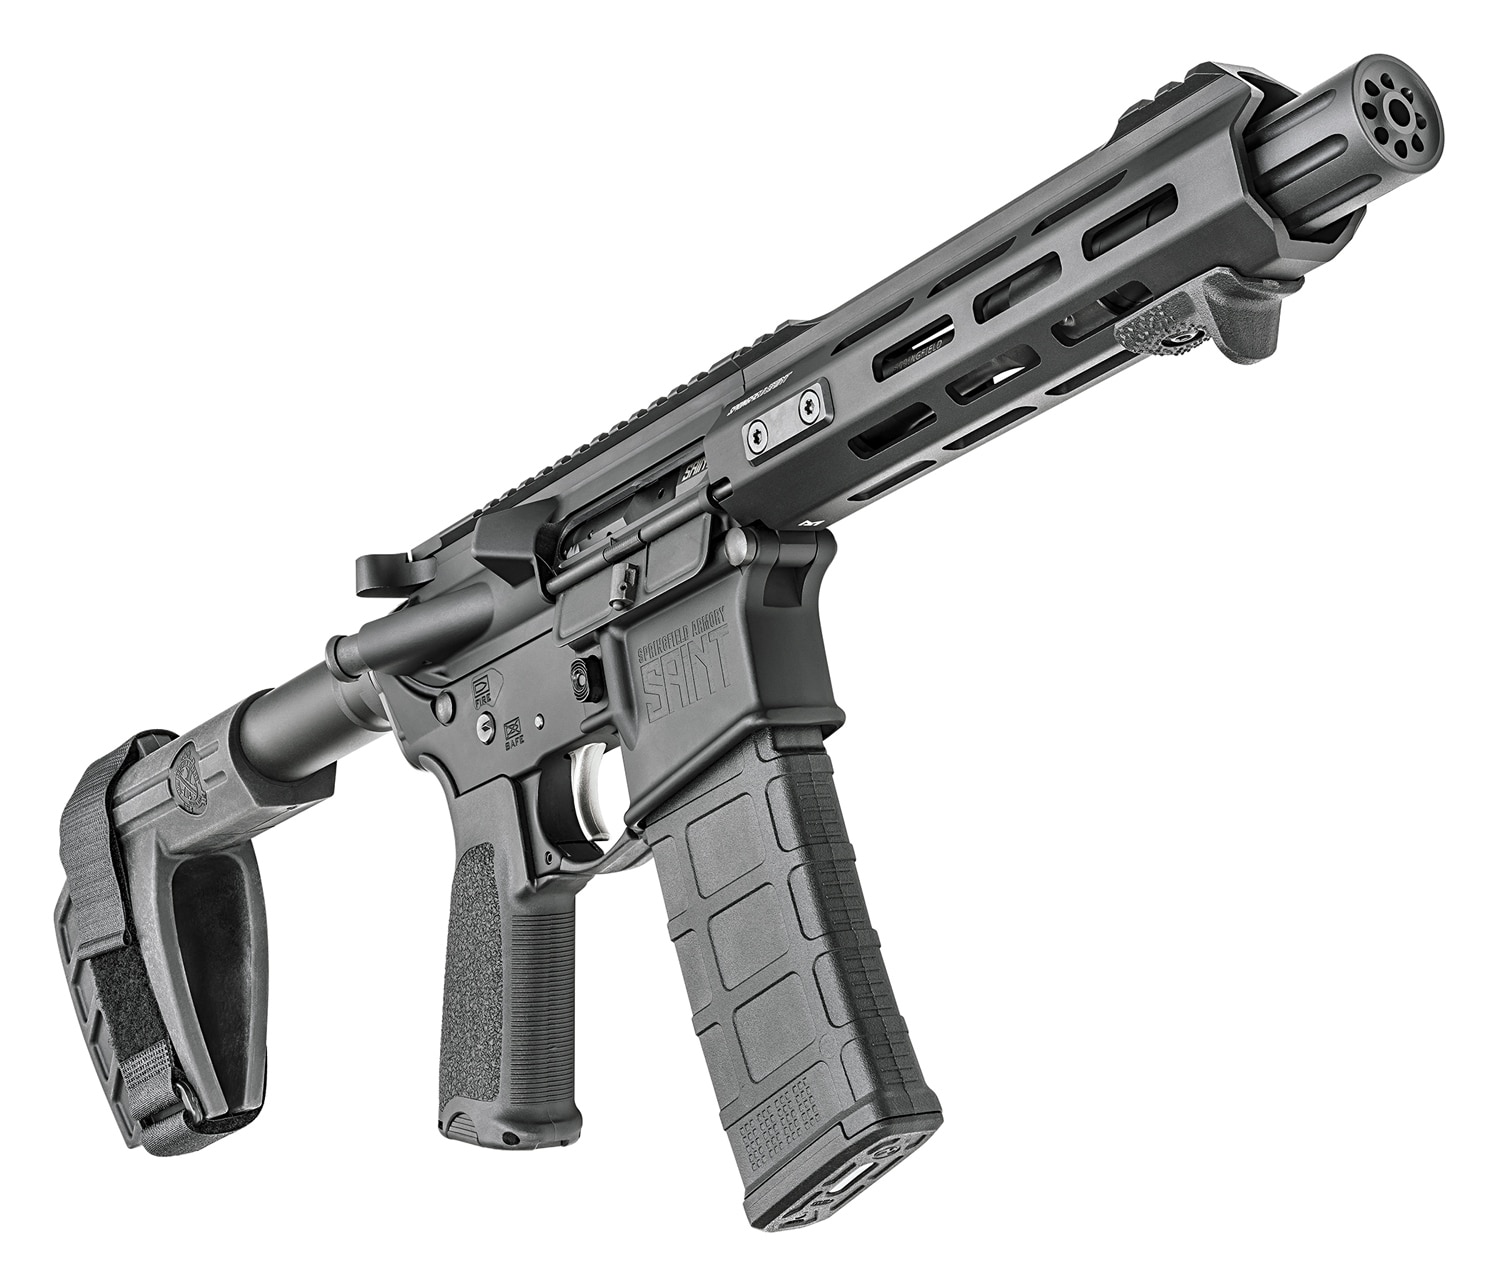 The Saint AR pistol chambered in 5.56mm. (Photo: Springfield Armory)